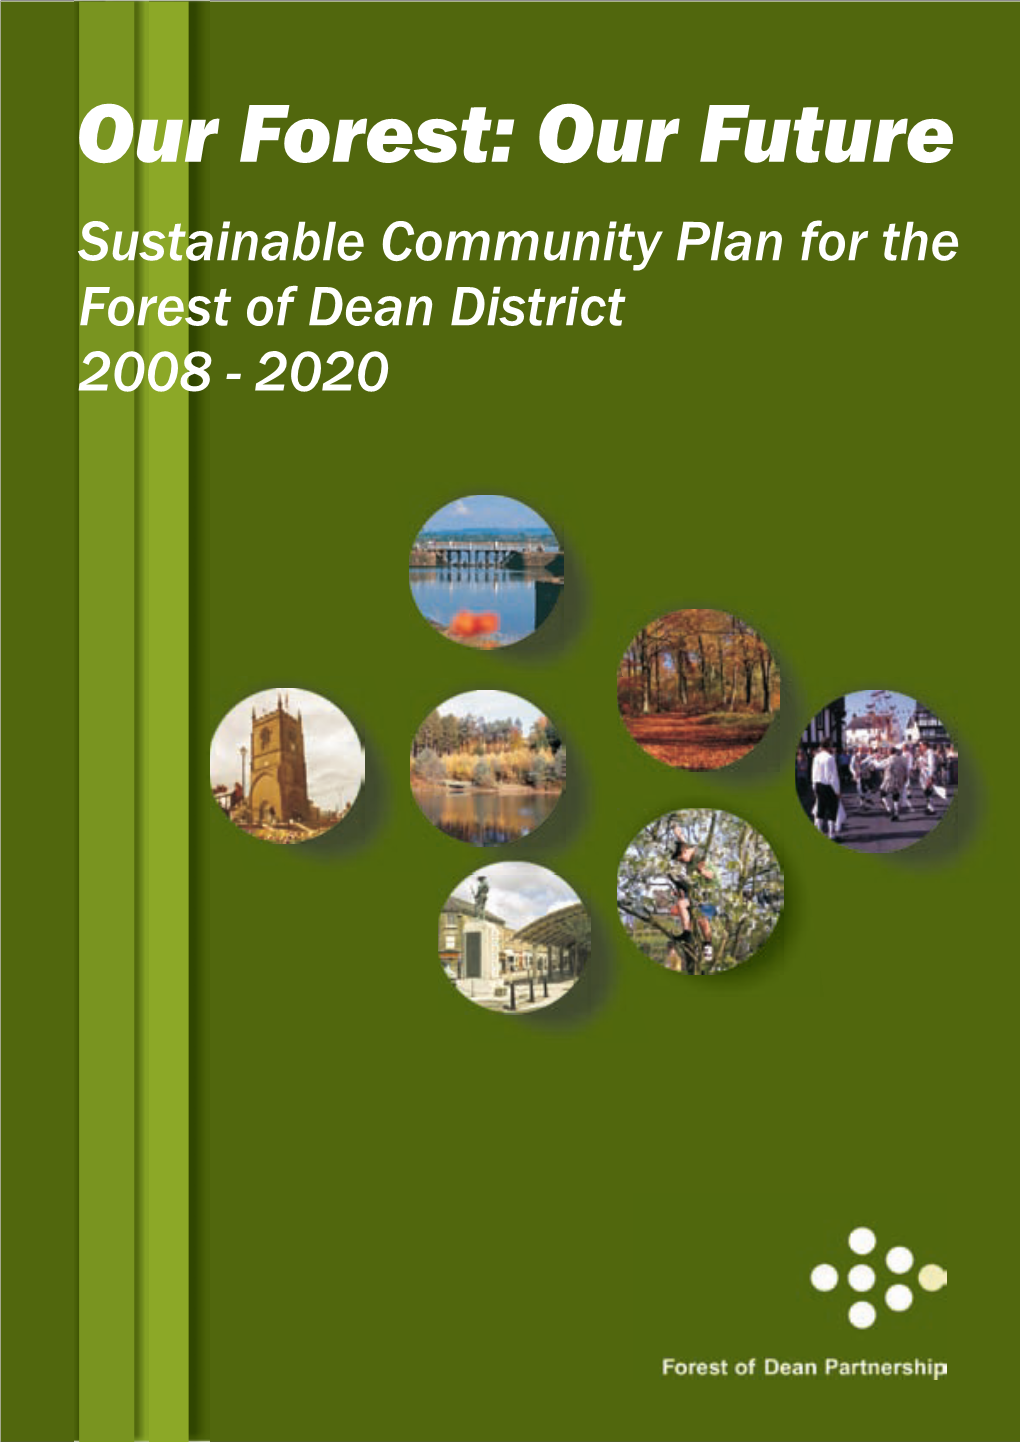 Sustainable Community Plan for the Forest of Dean District 2008 - 2020